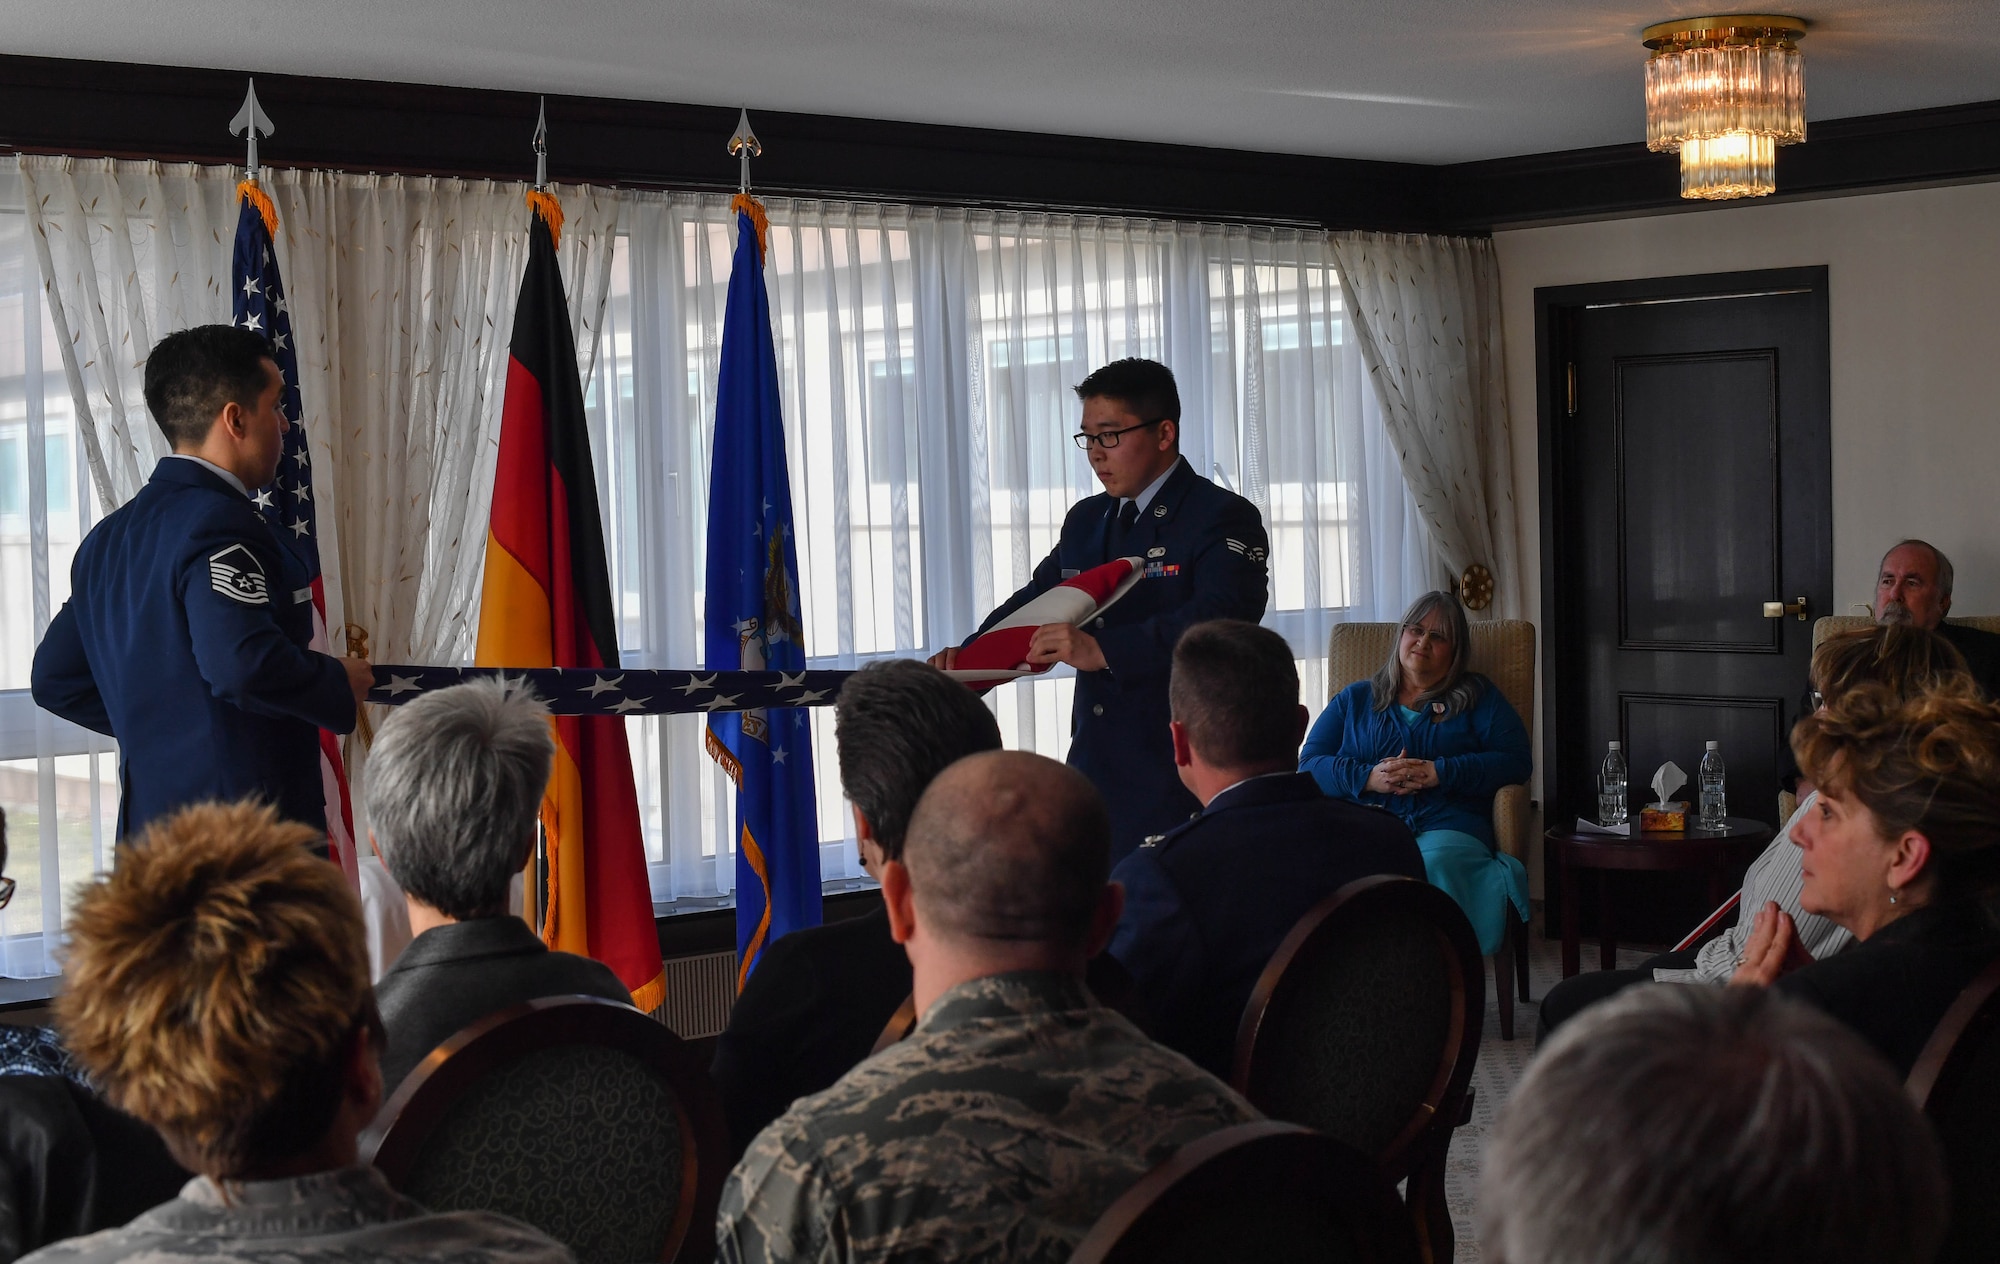 Master Sgt. Henry Lopez, U.S. Air Forces in Europe readiness and plans manager, and Senior Airman Zachary Abraham, 435th Security Forces Squadron commander’s support staff, fold an American flag during a dual retirement ceremony on Ramstein Air Base, Germany, Feb. 24, 2017. John and Colynn Hamilton, USAFE management analyst and human resources specialist respectively, as well as husband and wife, retired after more than 80 years of combined service. (U.S Air Force photo by Senior Airman Tryphena Mayhugh)